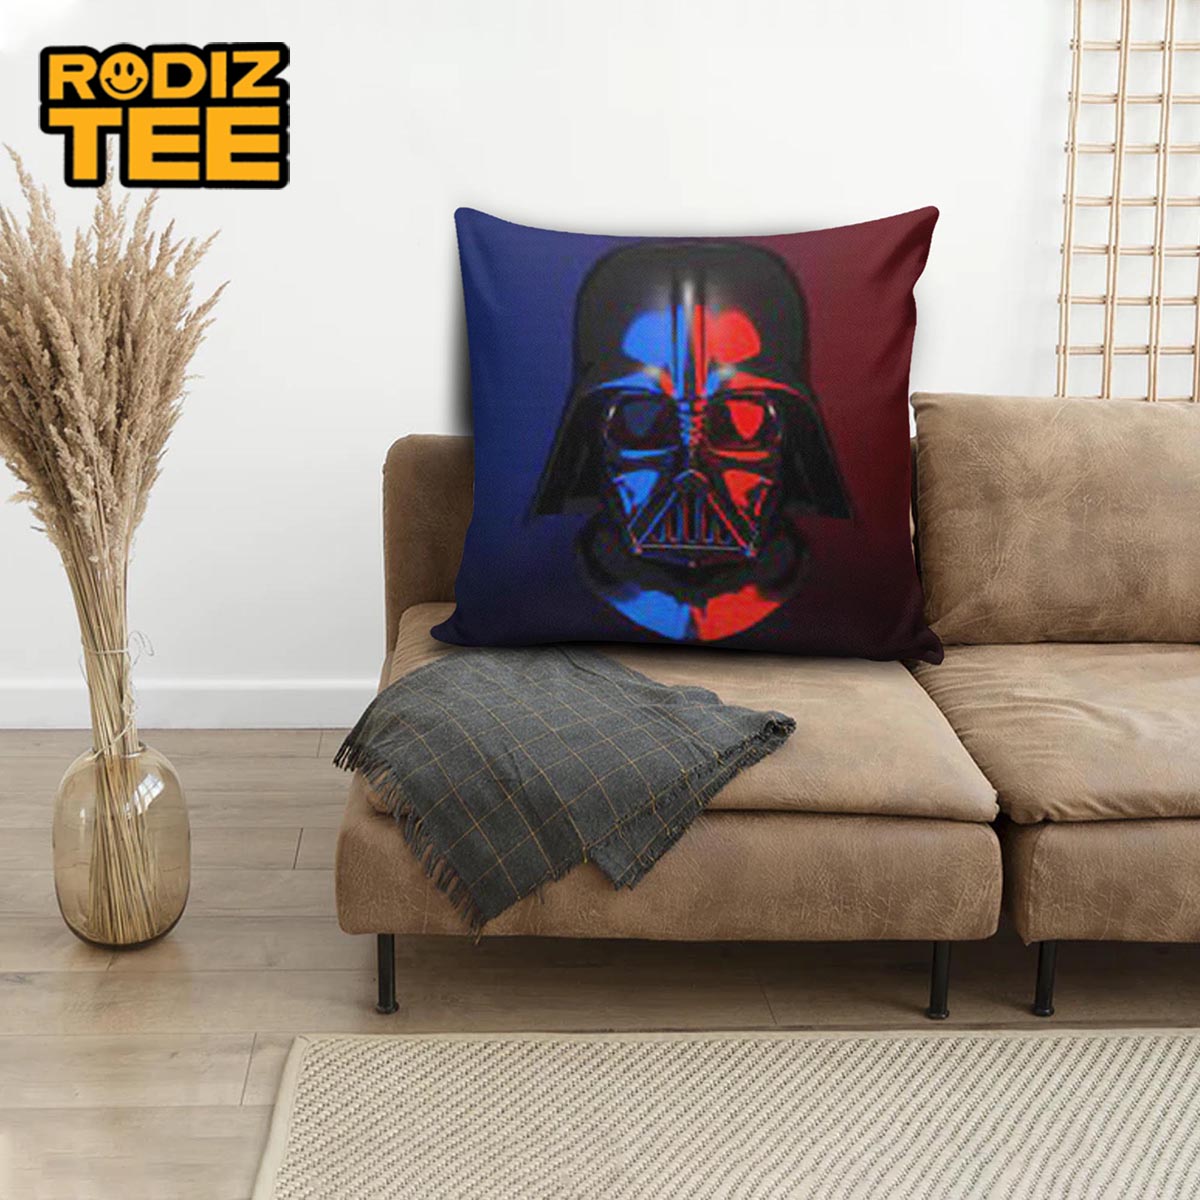 https://rodiztee.com/wp-content/uploads/2022/10/Star-Wars-Darth-Vader-Helmet-Splitted-Into-Blue-And-Red-Throw-Pillow-Case_52525857.jpg